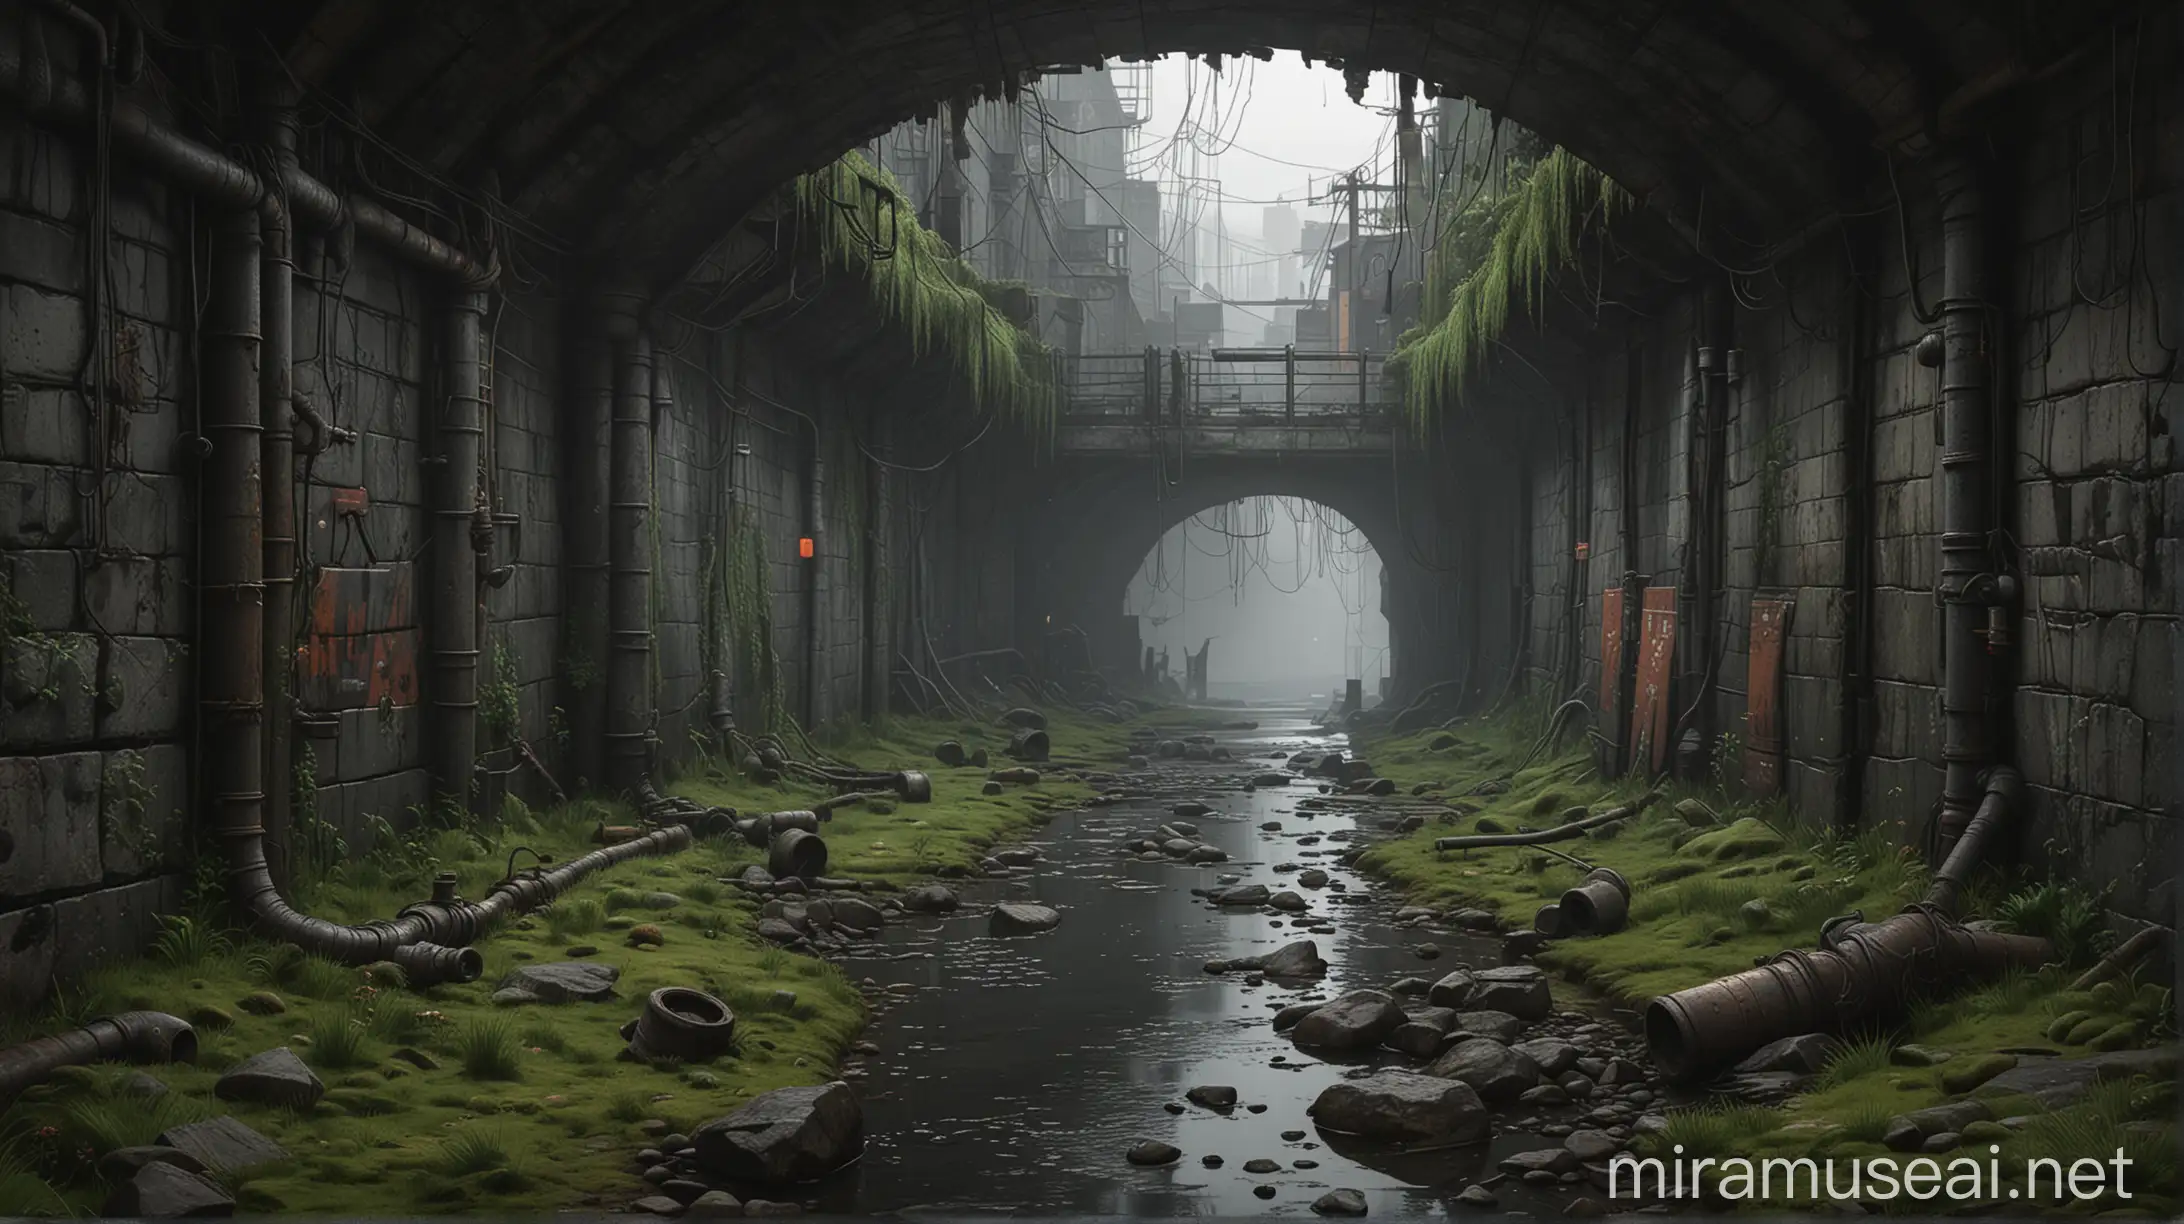 A dark, atmospheric sewer background for a 2D indie platformer game. The scene should include distant, shadowy brick walls covered with moss and grime, subtle, eerie lighting, and the faint outlines of pipes and infrastructure. The overall mood should be ominous and mysterious. The style should be inspired by artists Simon Stålenhag, Ralph McQuarrie, and Syd Mead, with a focus on depth and atmosphere well cut realistic drawing, monochrome, sketchfab, with 100% white background, sprite sheet, spread sheet , realistic drawing, in a front view prospective